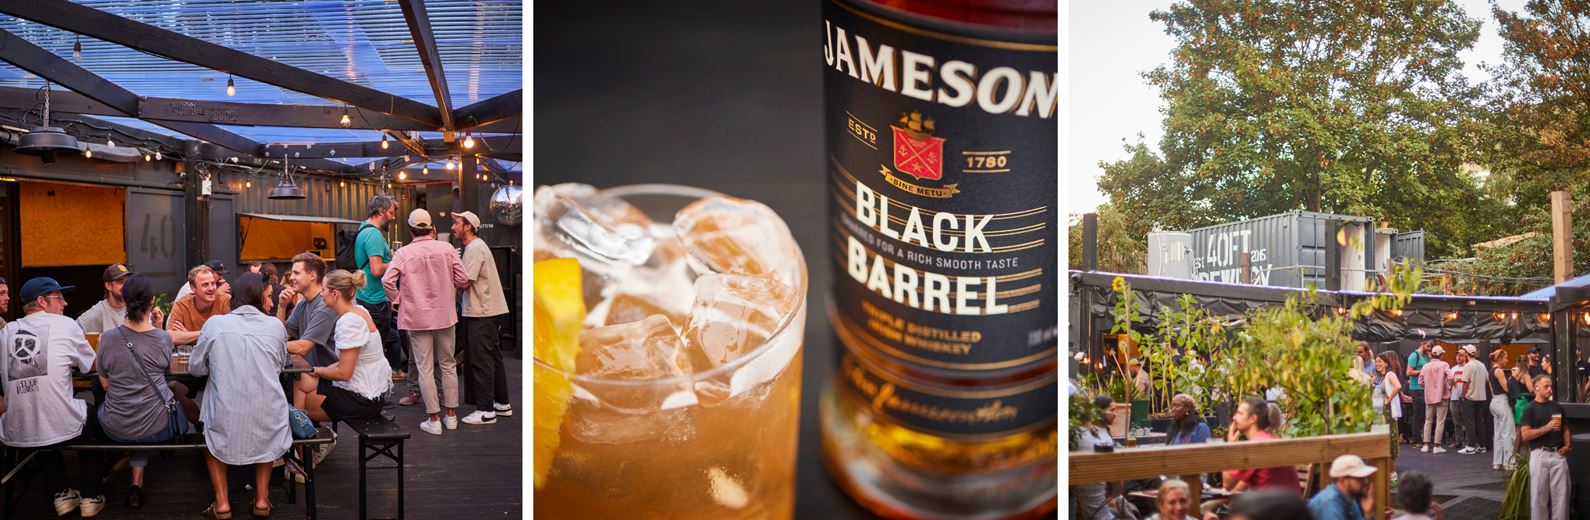 Jameson Black Barrel Meets 40ft Brewery, A Whiskey & Beer Masterclass